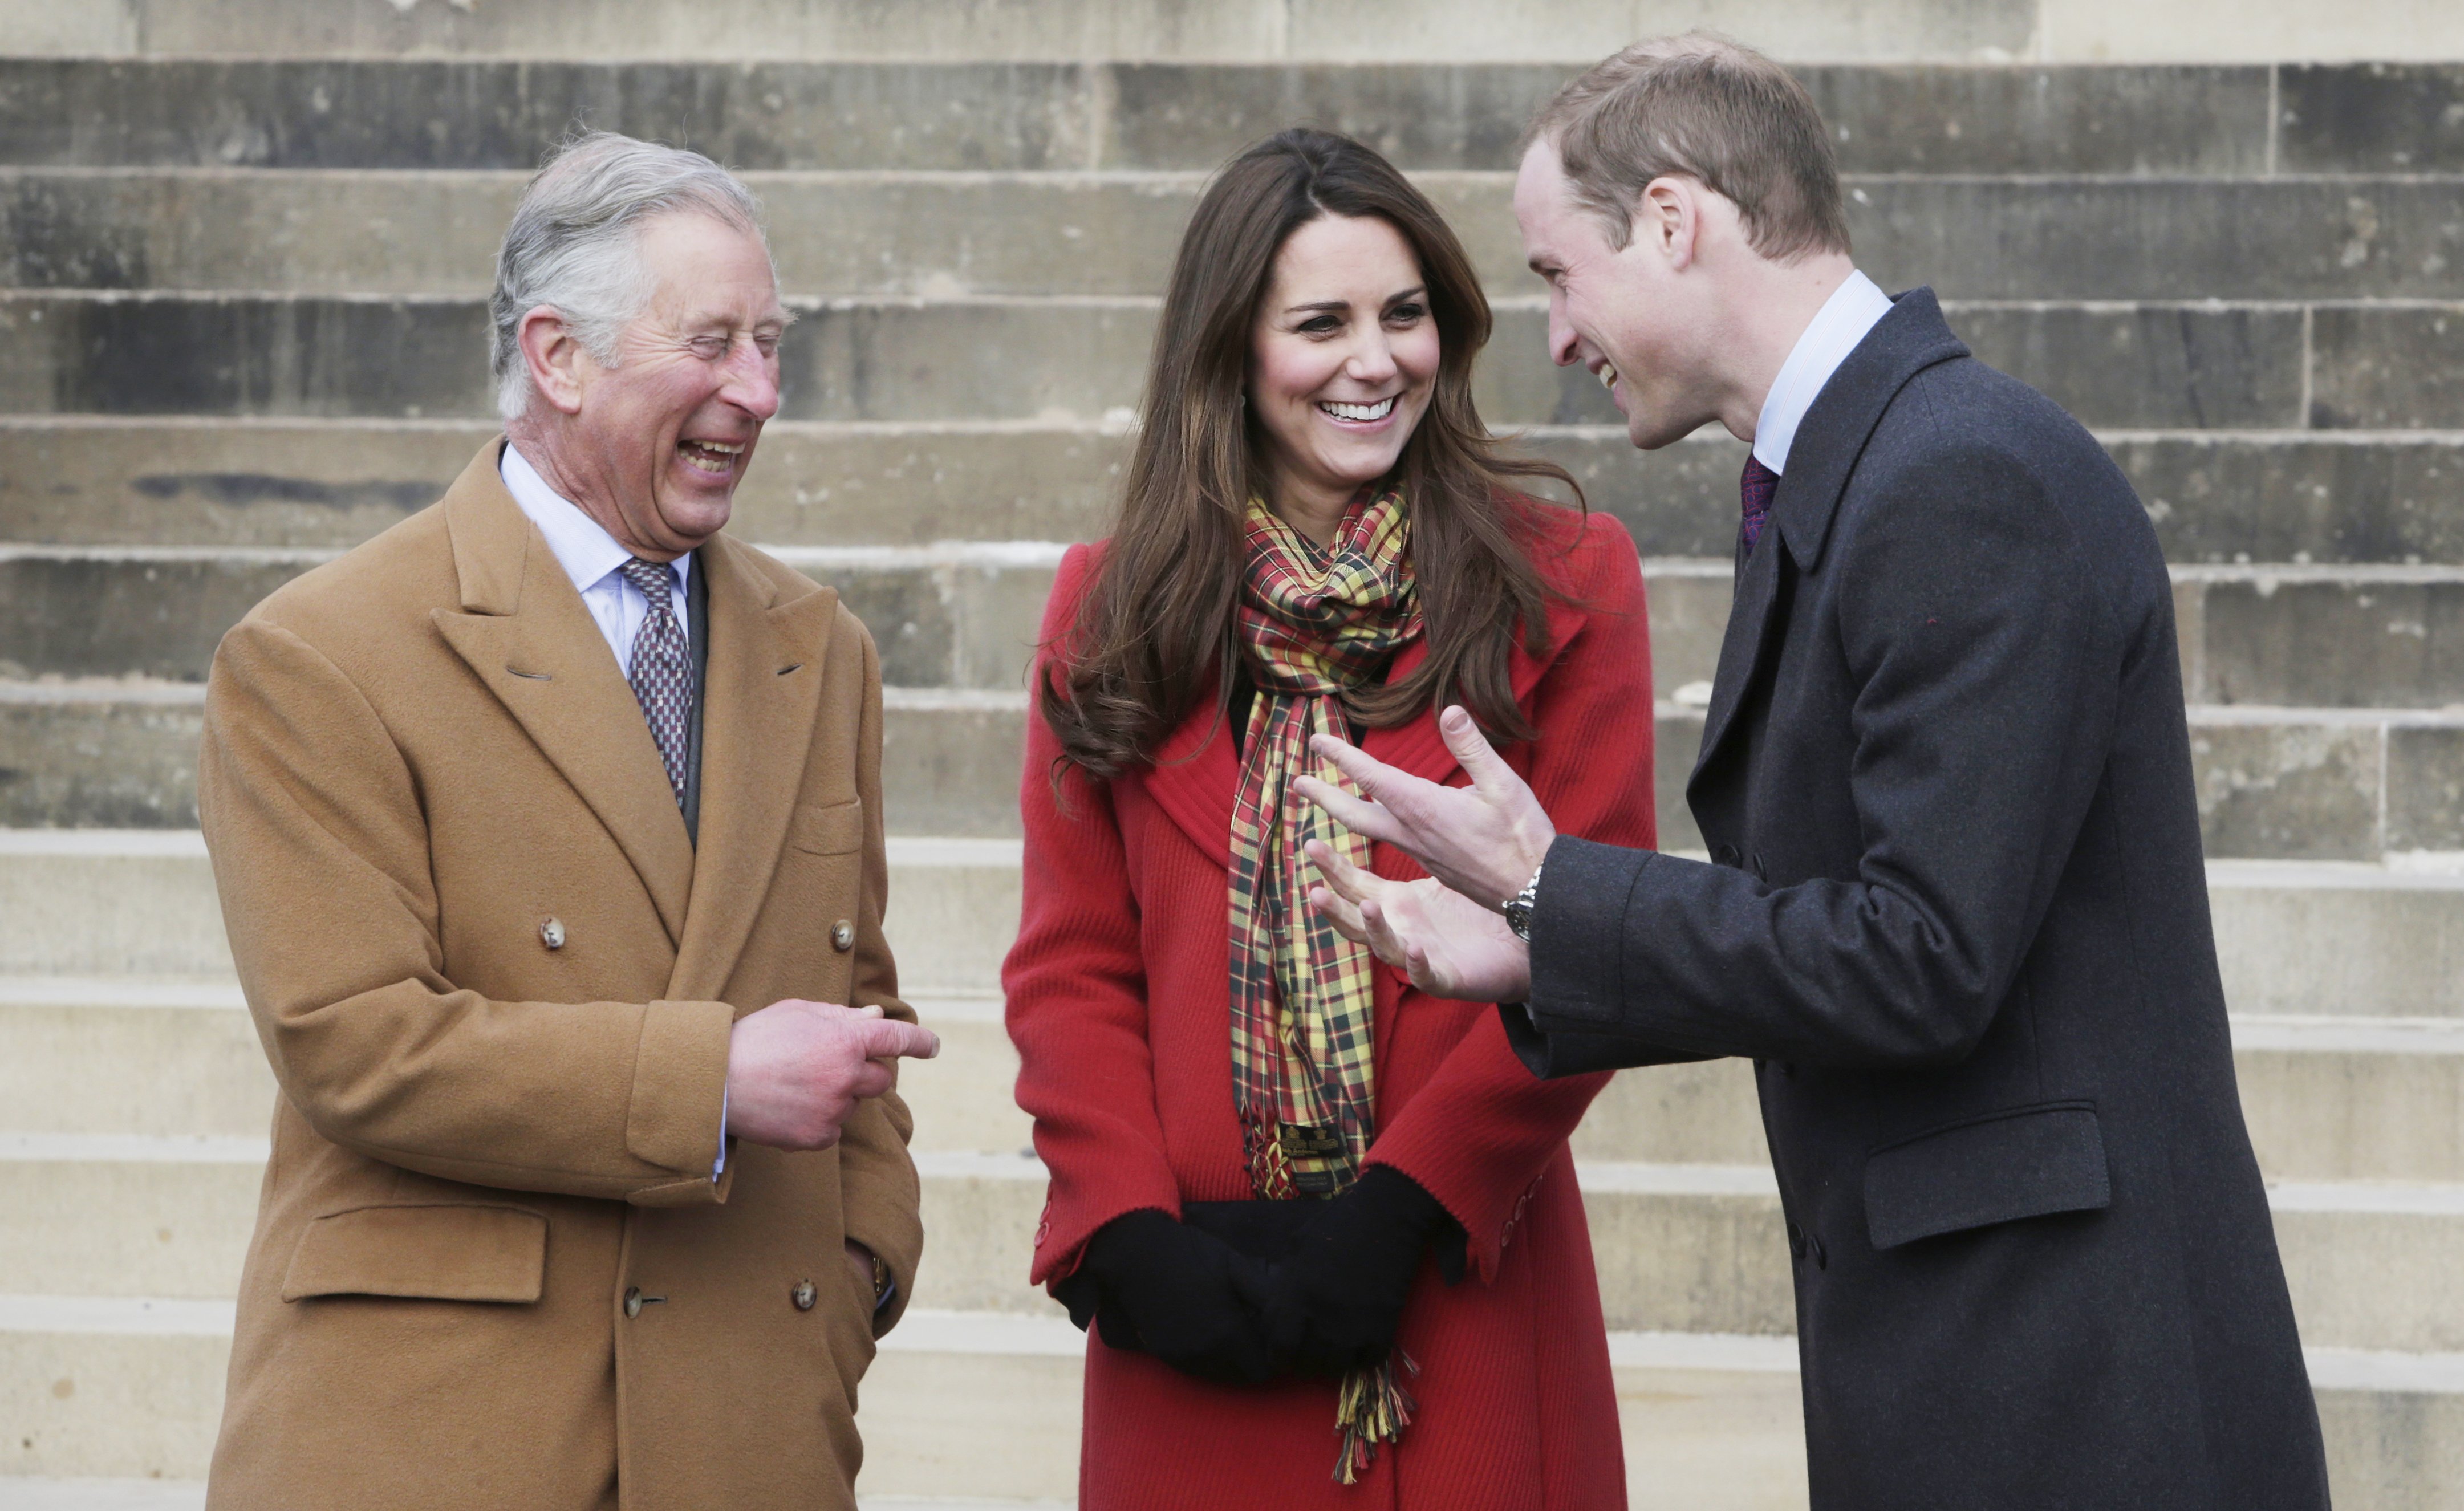 King Charles III, Prince William and Kate Middleton in Ayrshire, Scotland 2013. | Source: Getty Images 